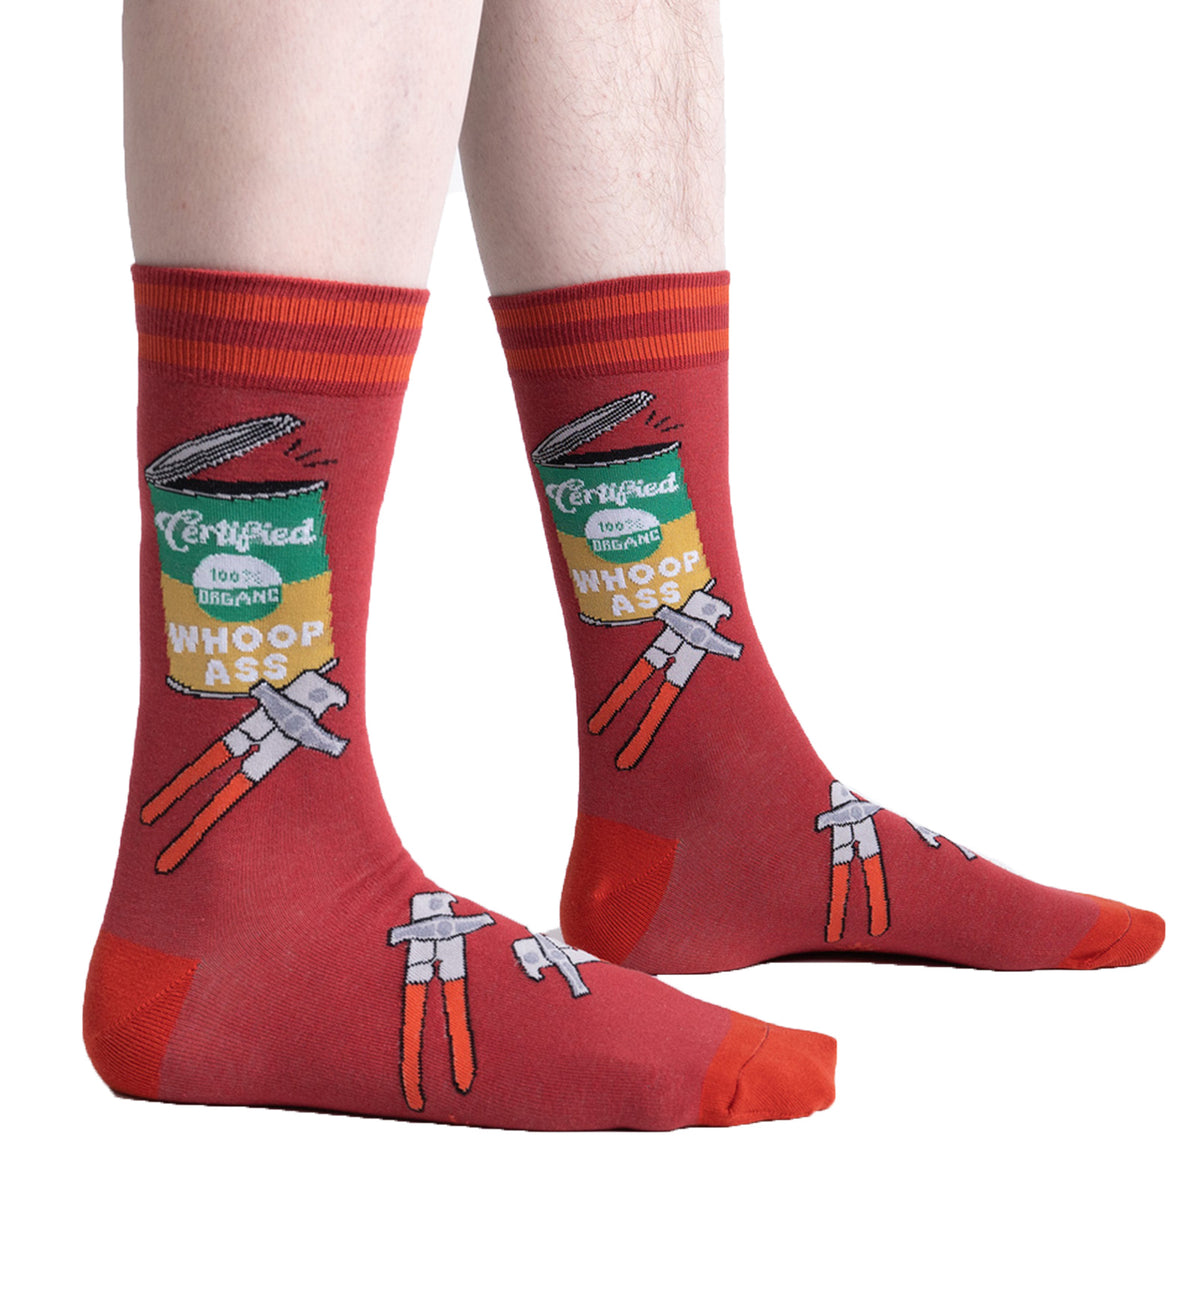 SOCK it to me Men&#39;s Crew Socks (MEF0627),Opening Up A Can - Opening Up A Can,One Size